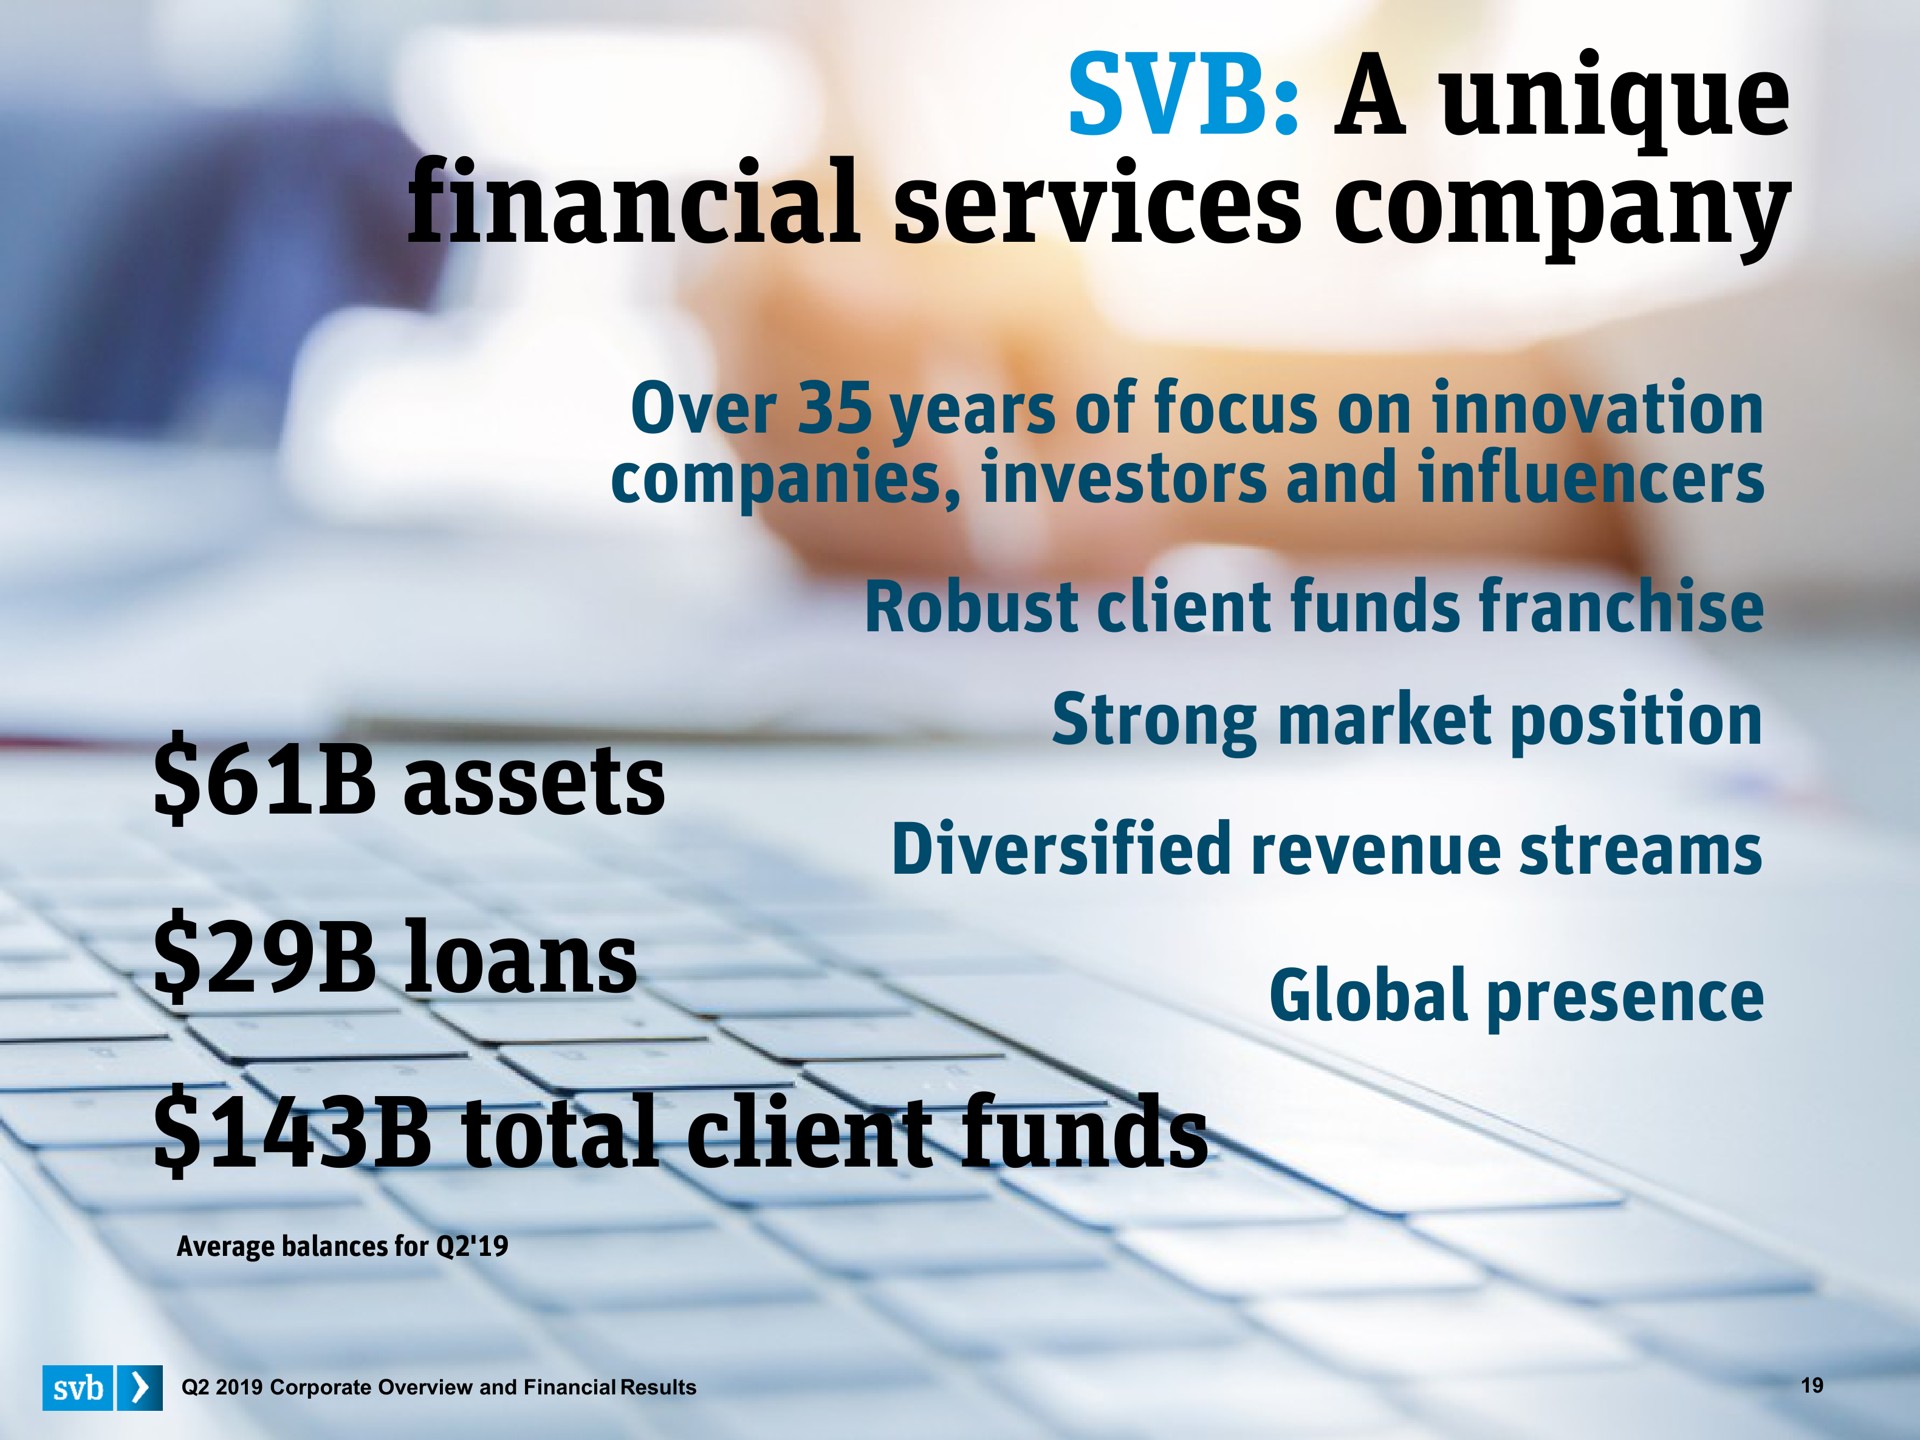 a unique financial services company over years of focus on innovation companies investors and assets loans robust client funds franchise strong market position diversified revenue streams global presence total client funds | Silicon Valley Bank